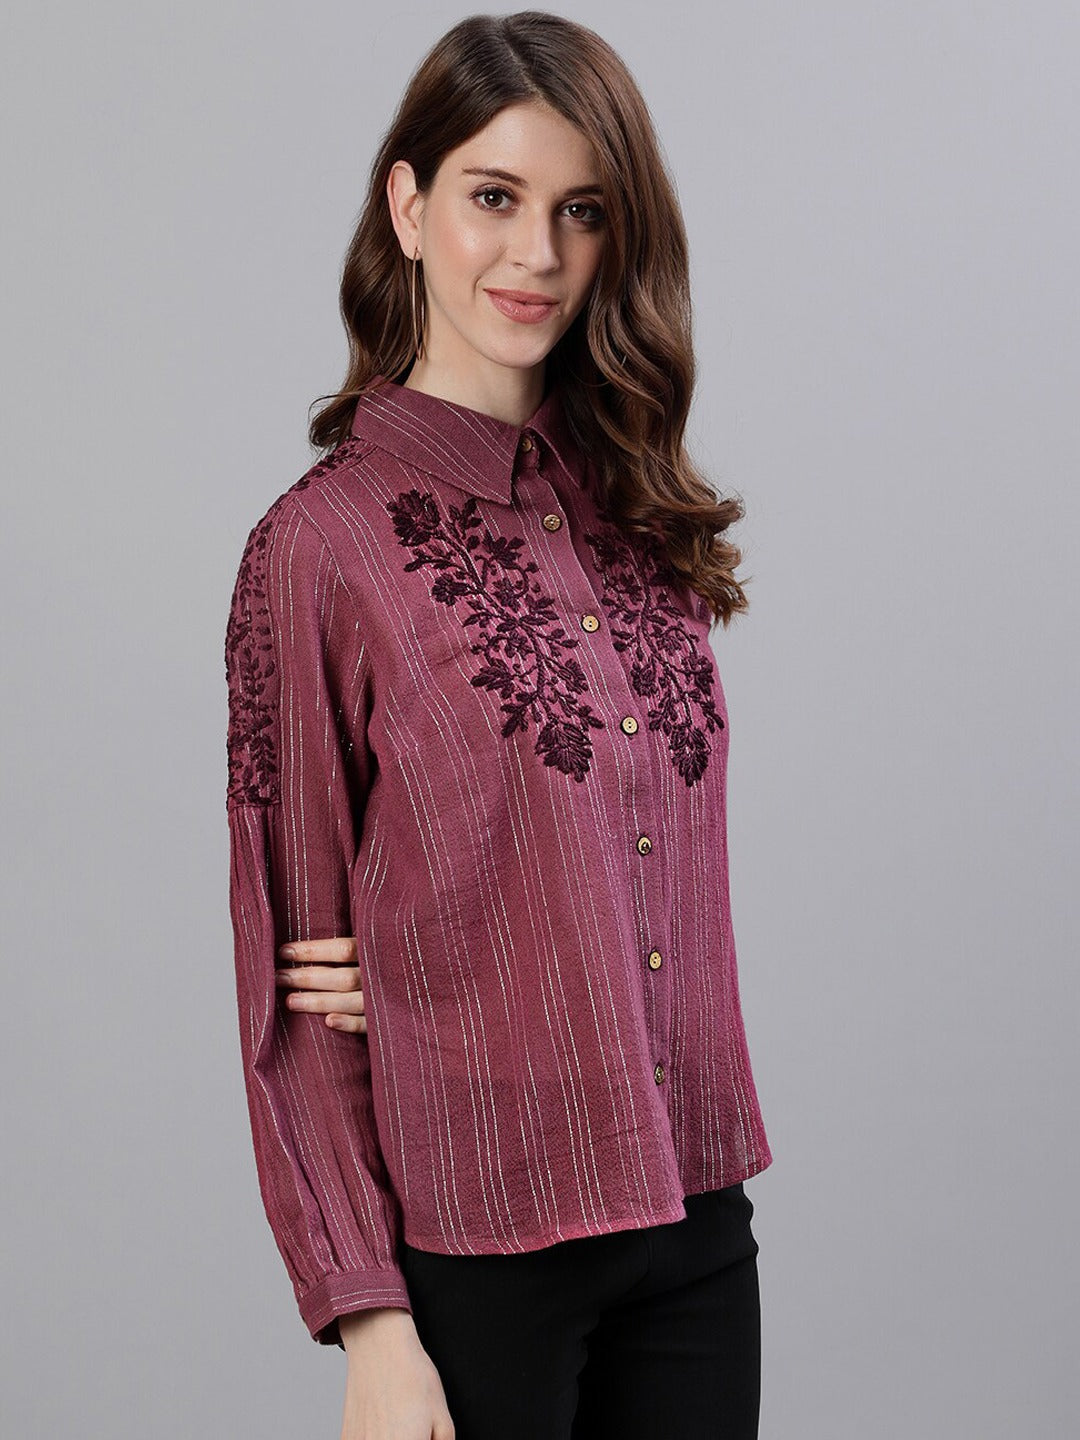 Ishin Women's Purple Floral Striped Embroidered Shirt Style Top